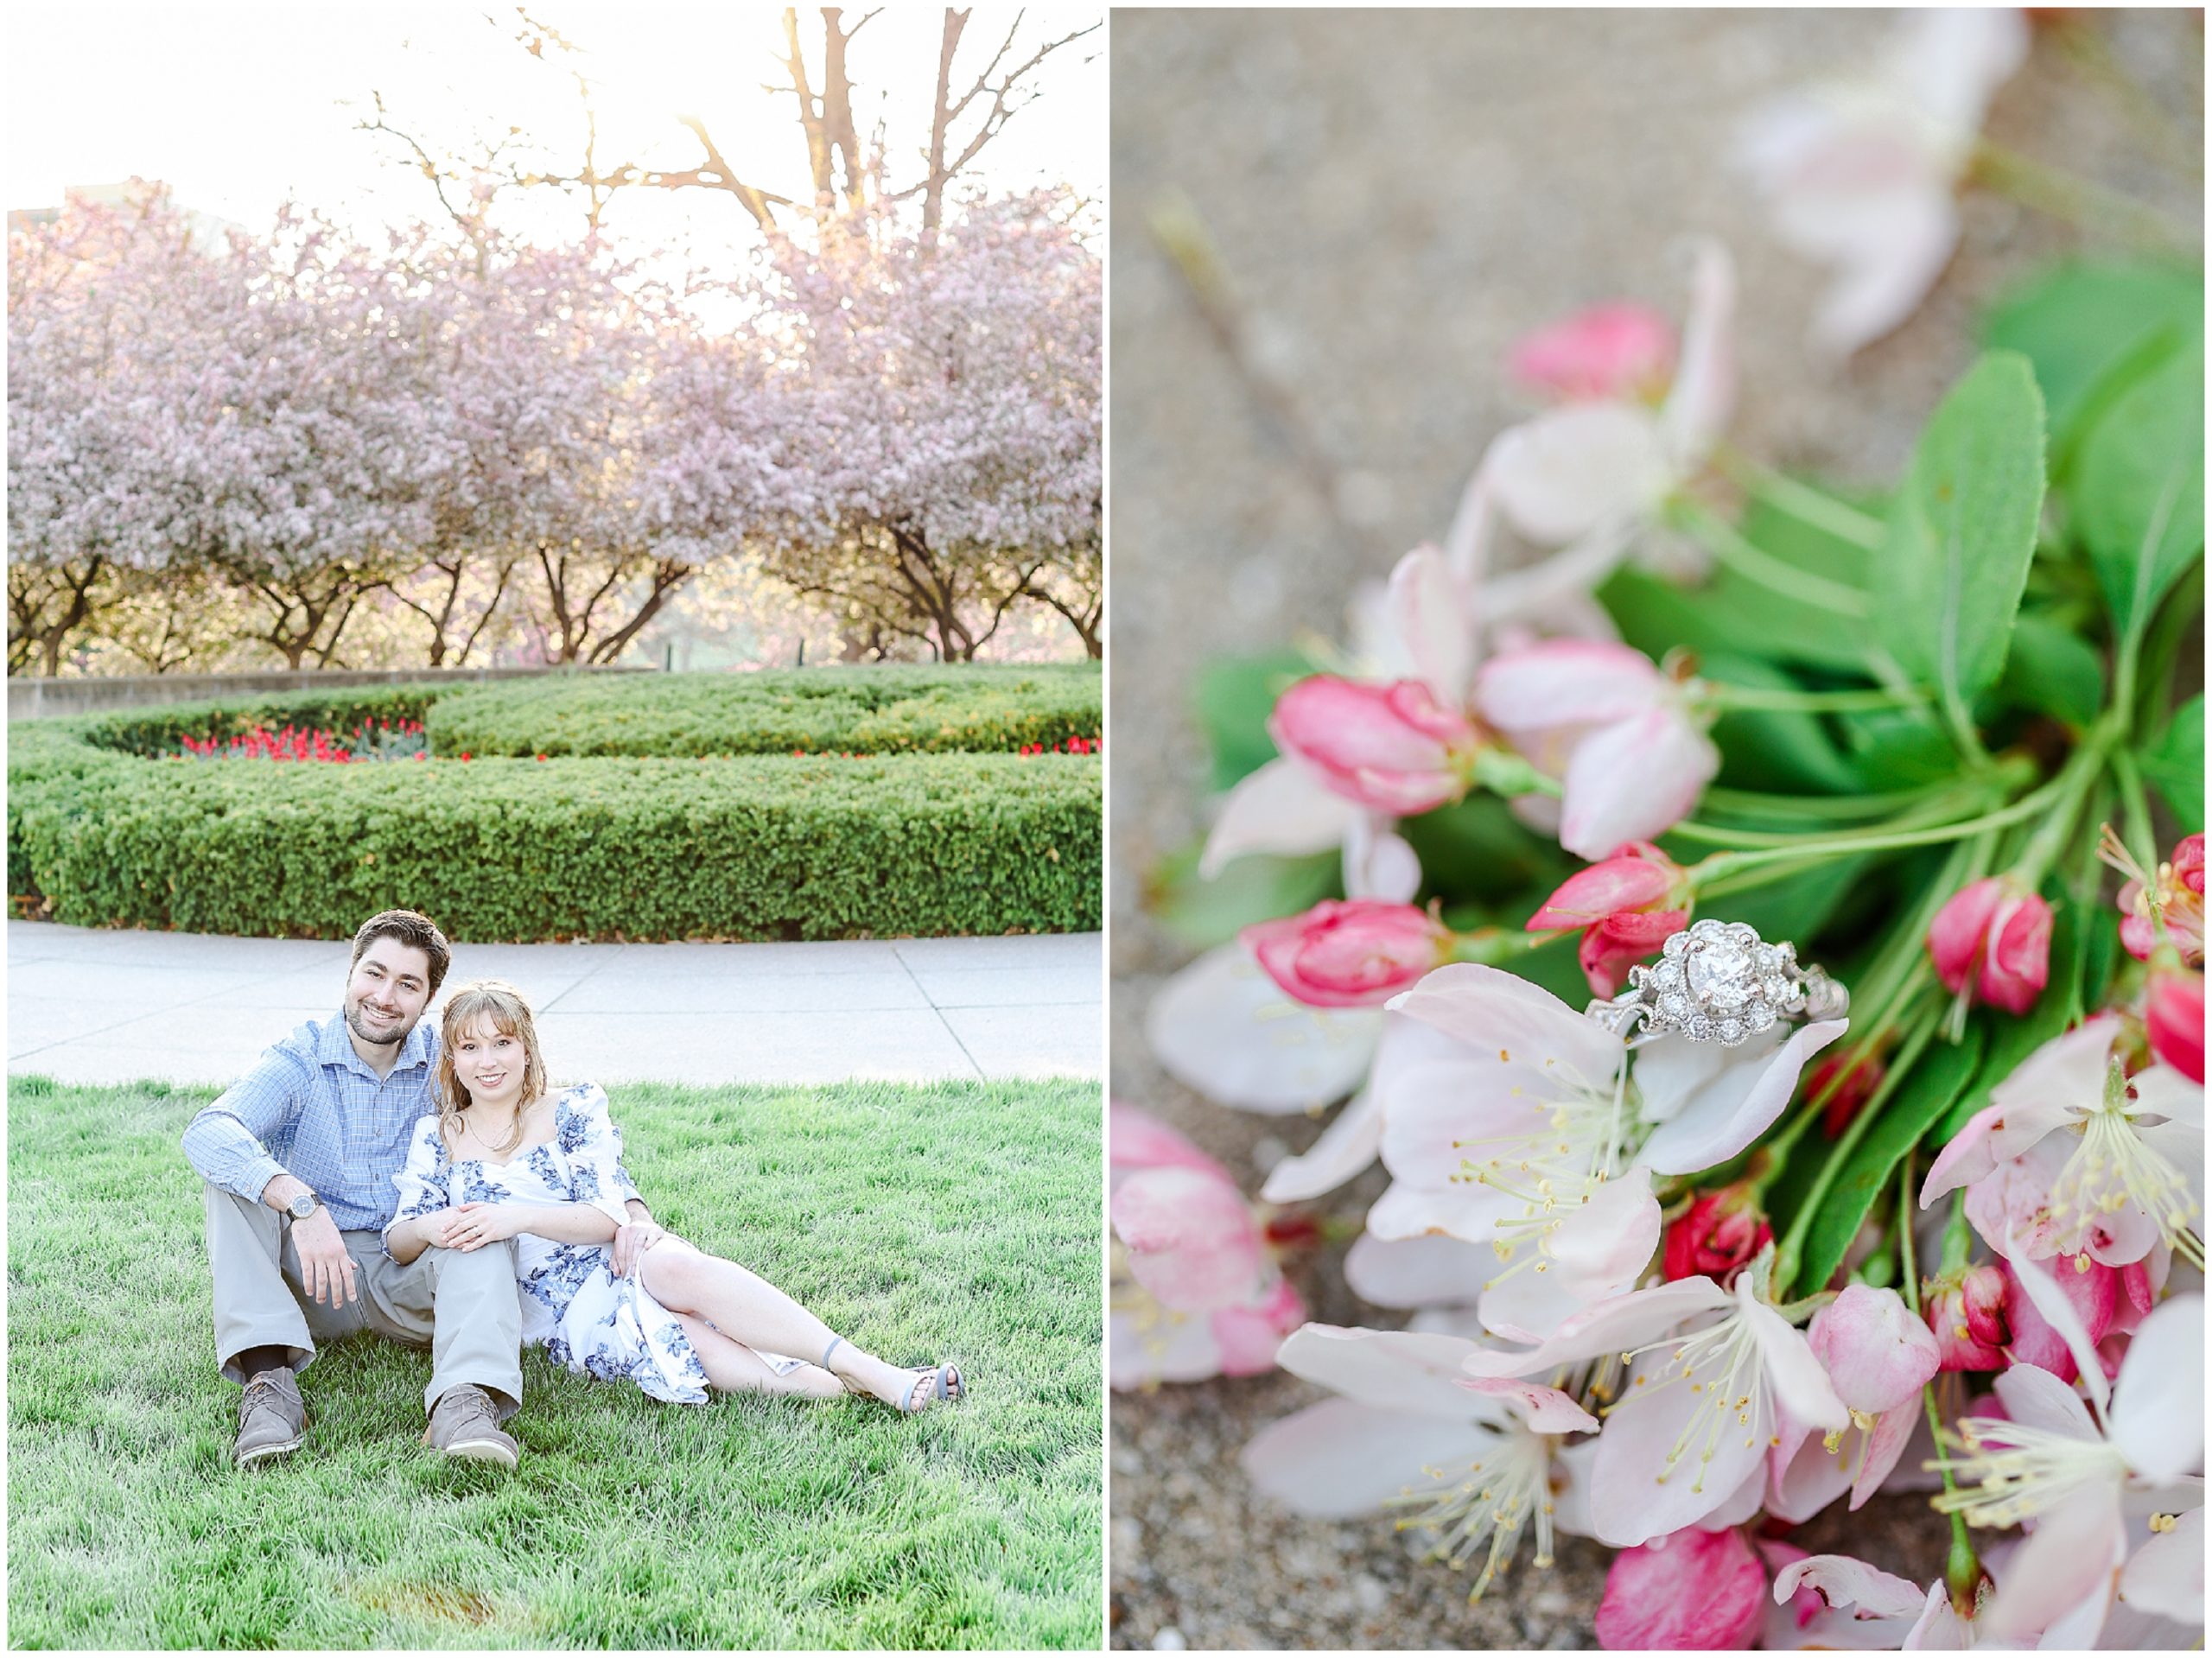 Look at what they wore for their engagement photos! Spring Engagement Photos with Ali & Connor at the Nelson Atkins Museum in Kansas City by best wedding photographer Mariam Saifan Photography - Engagement and Wedding Style Guide - What to Wear and Where to Take Your Photos in Kansas City 